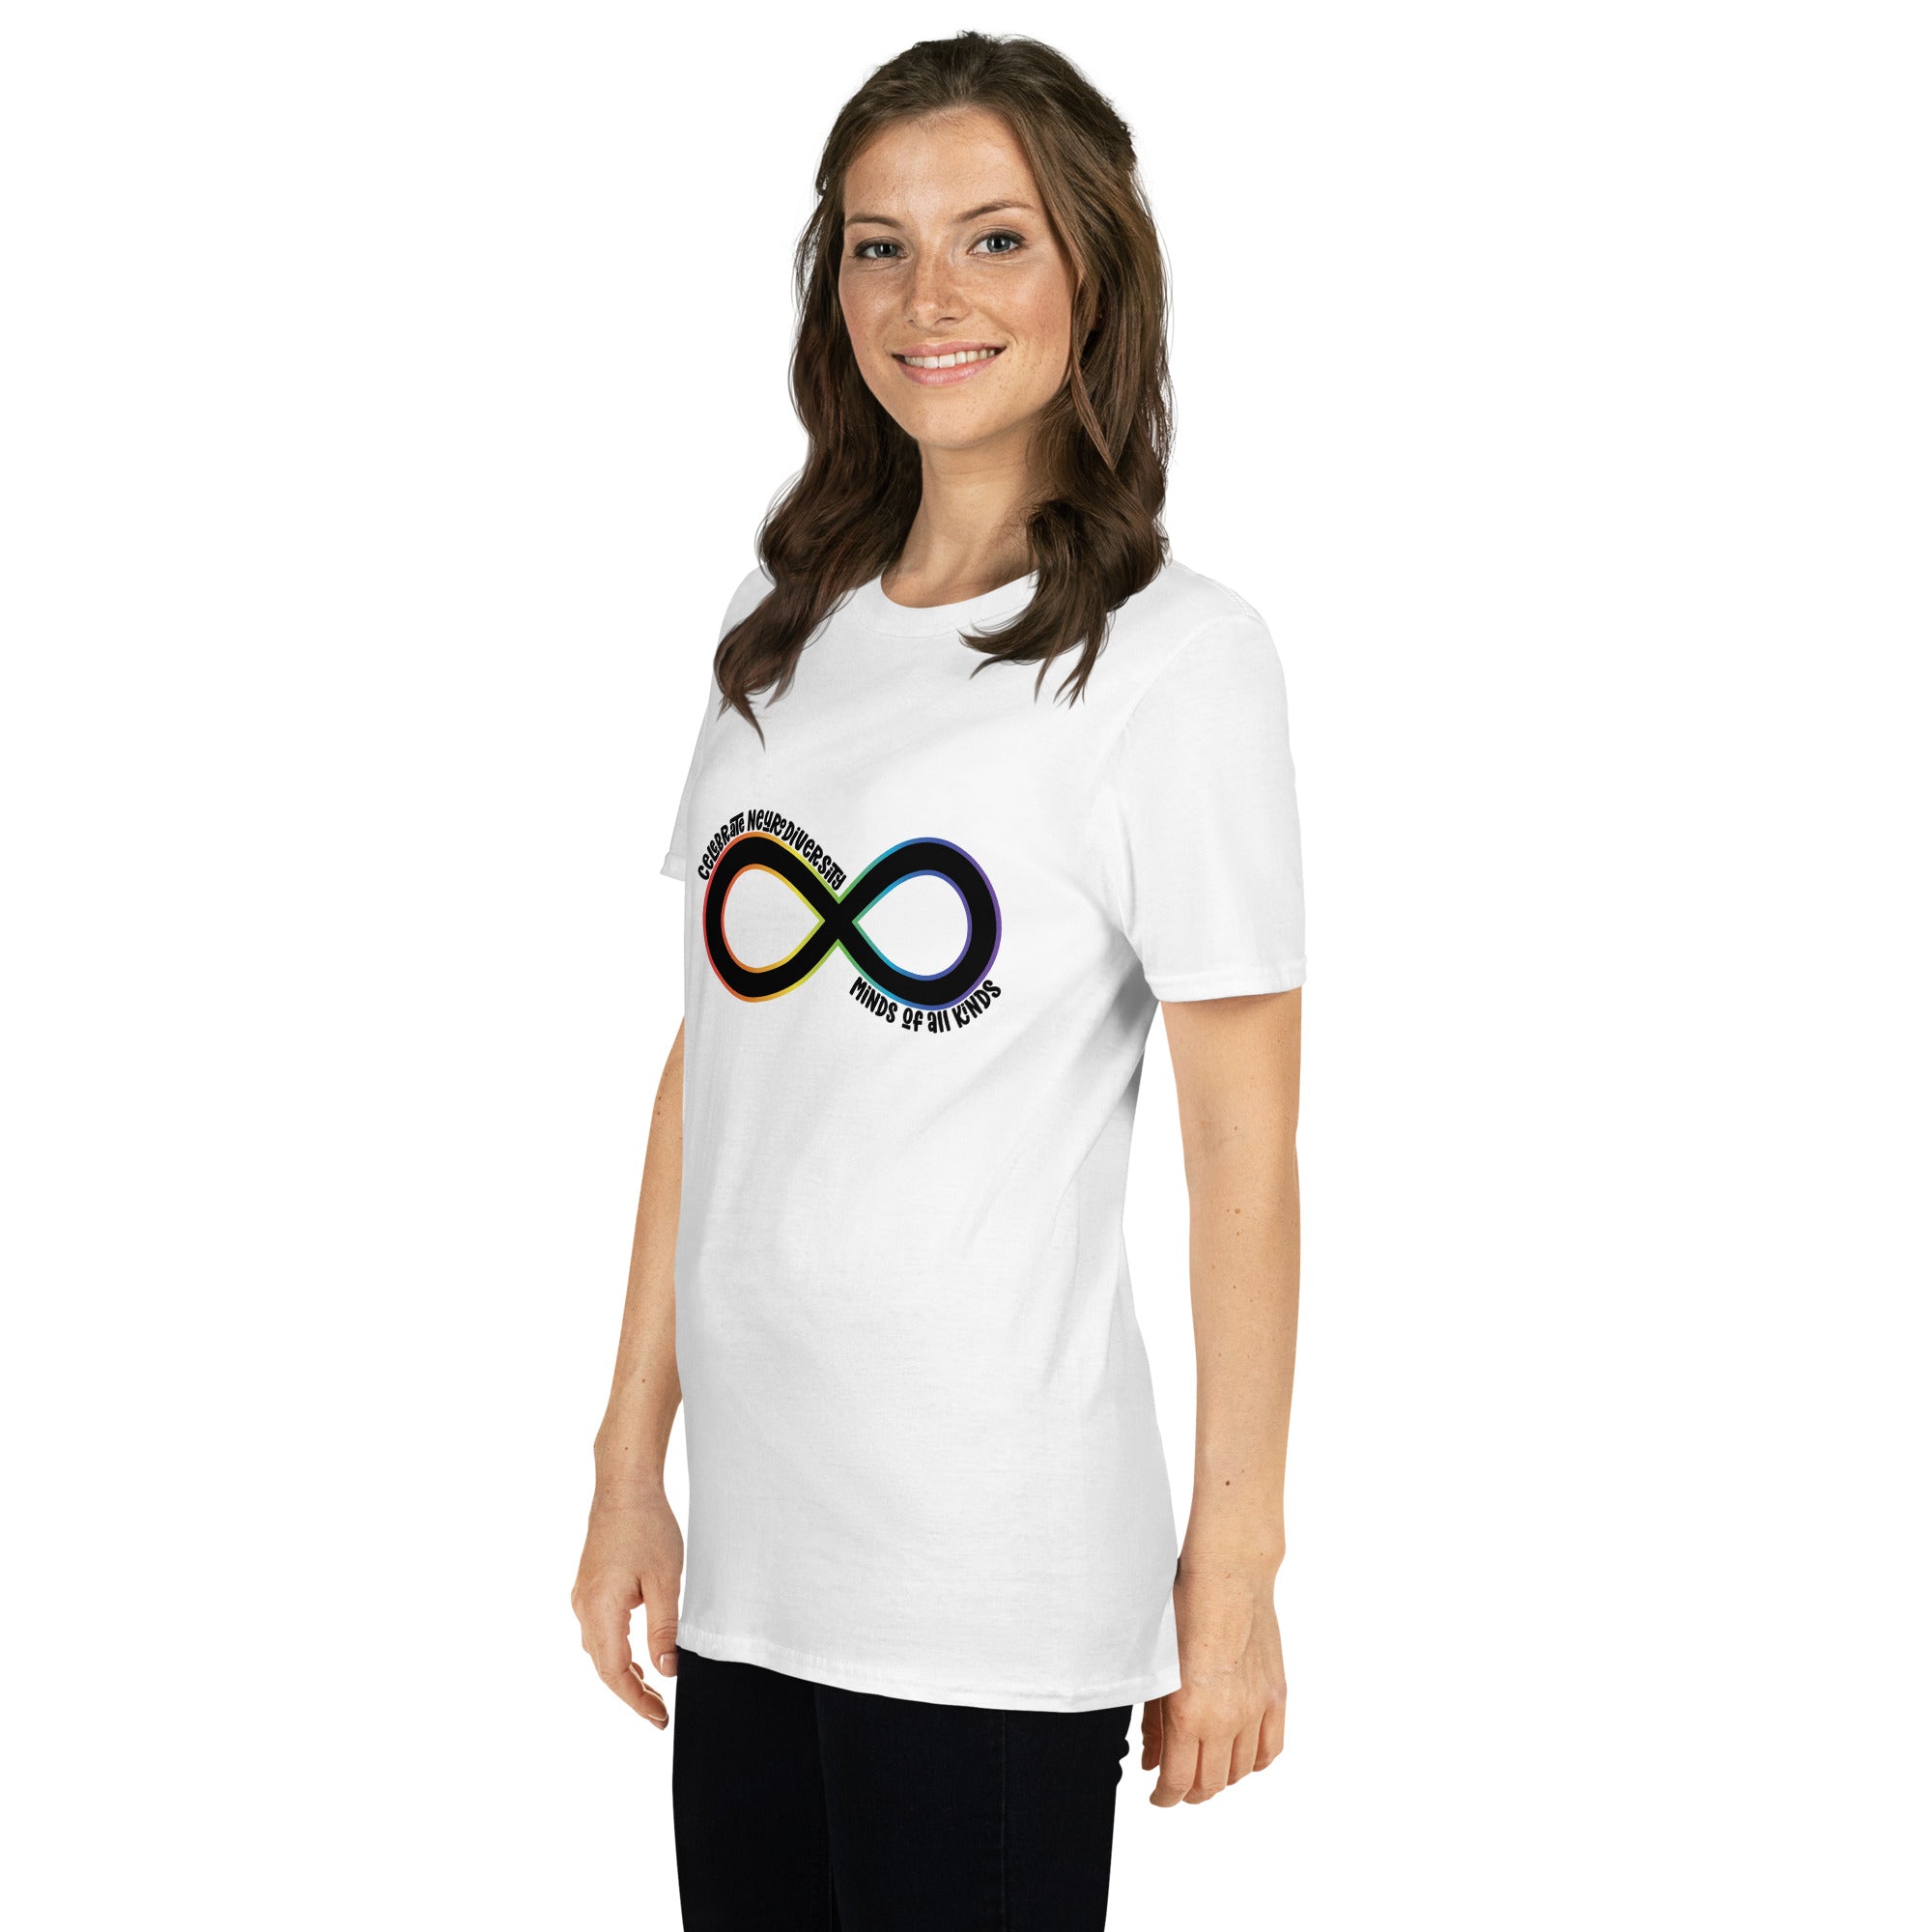 Short-Sleeve Unisex T-Shirt- ADHD- Minds Of All Kinds